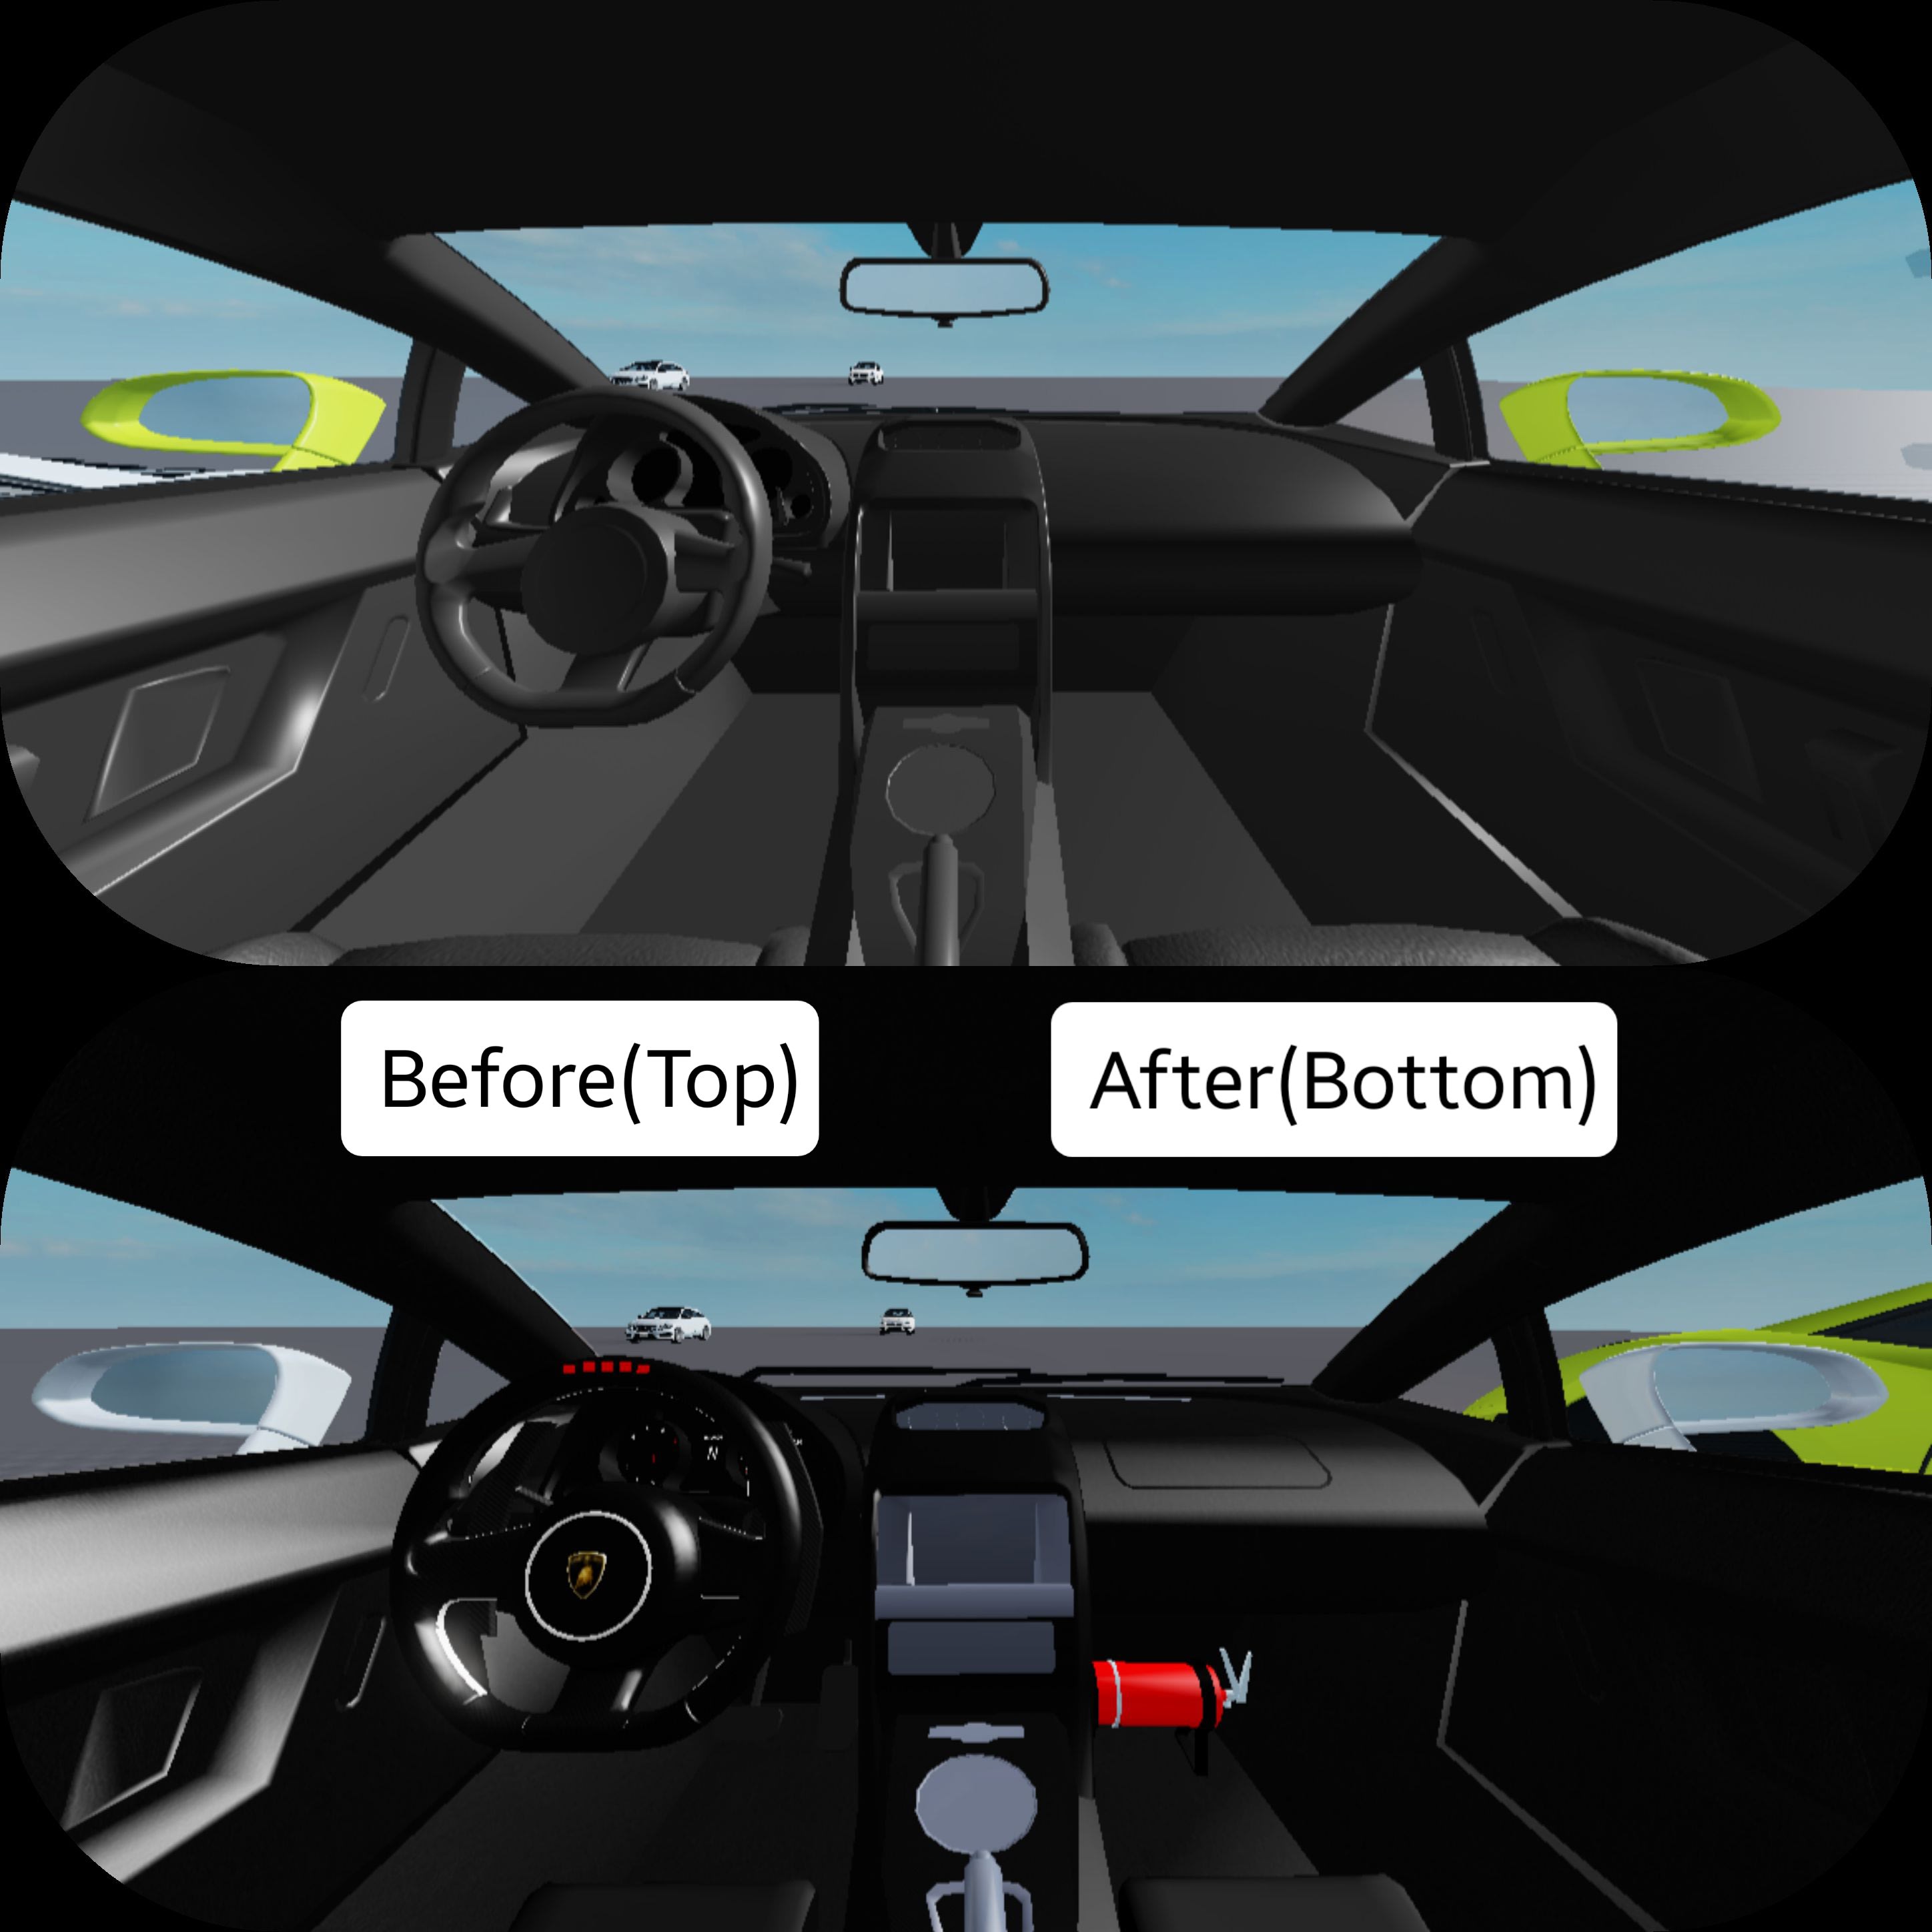 Modify Your Car Model In Roblox Studio With The Specifications You Desire By Sebastian Yeong Fiverr - roblox studio how to script a car